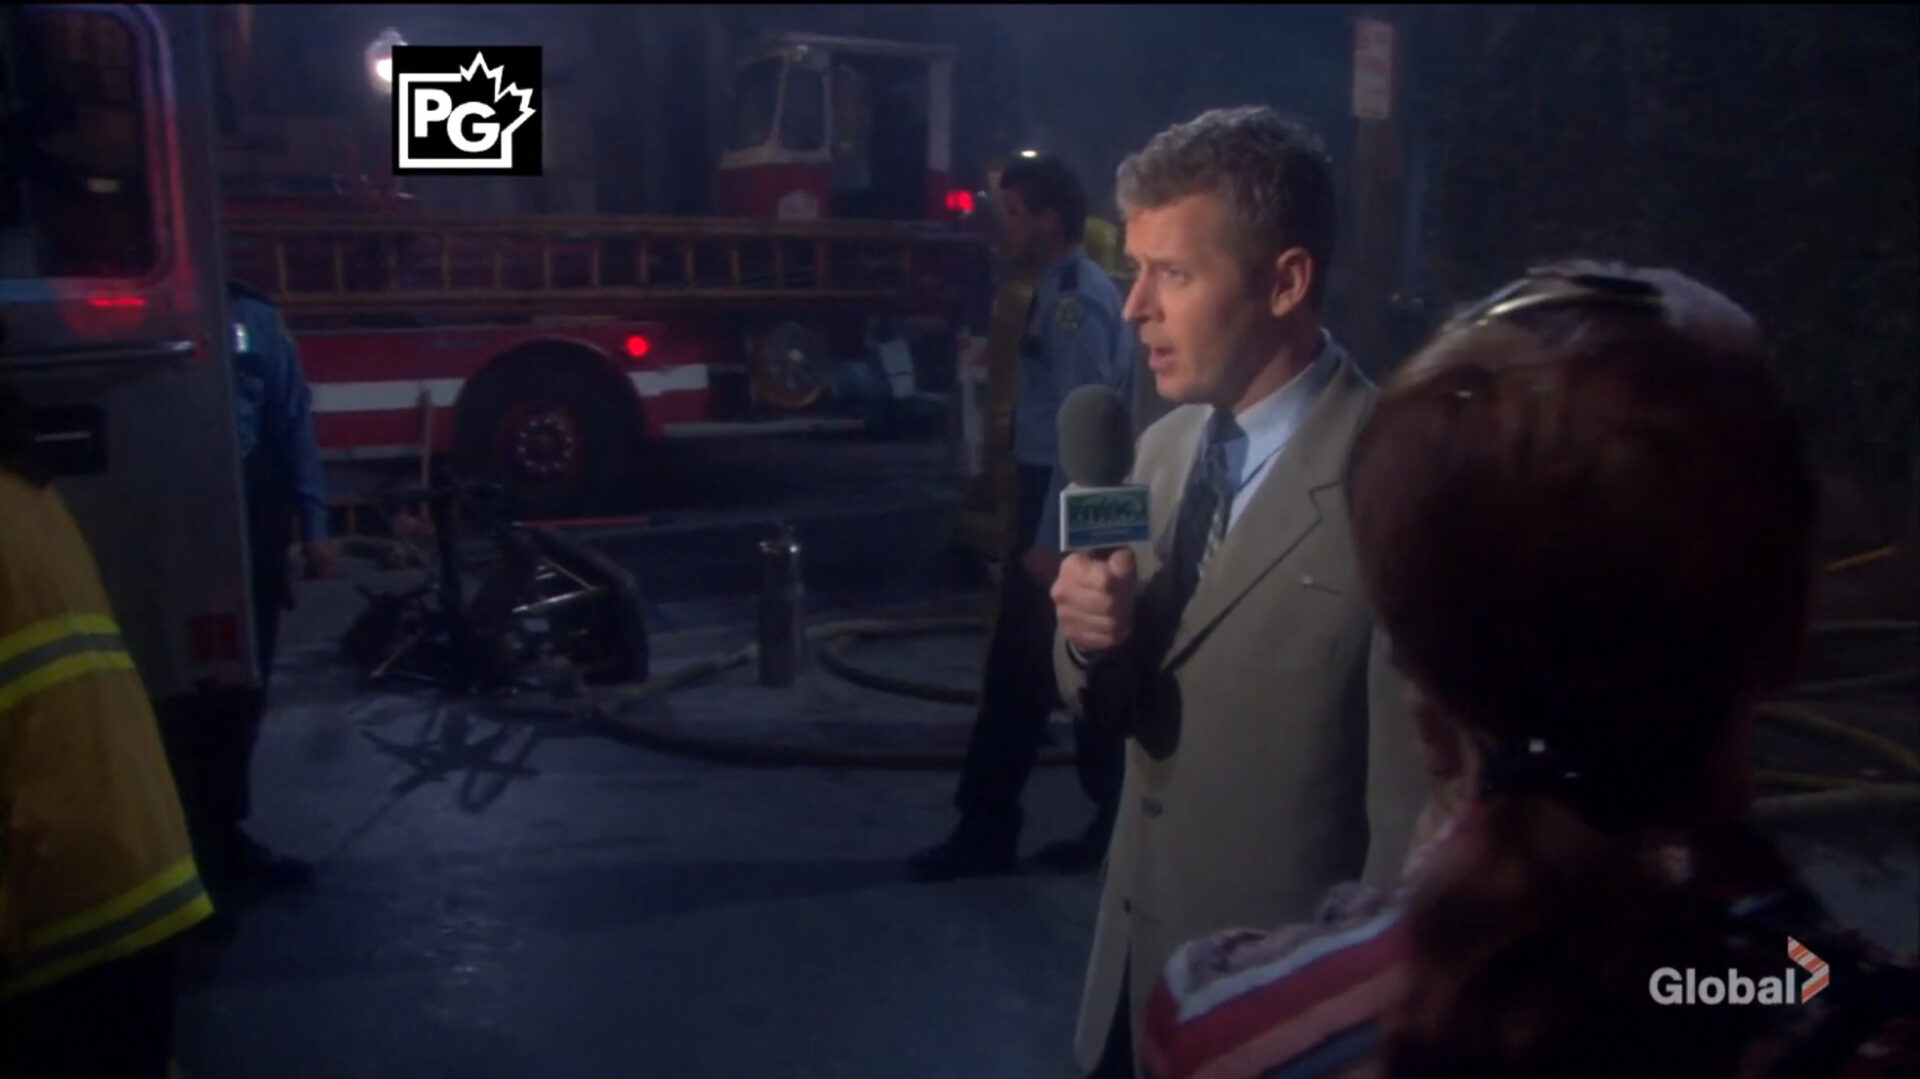 reporter on Y&R